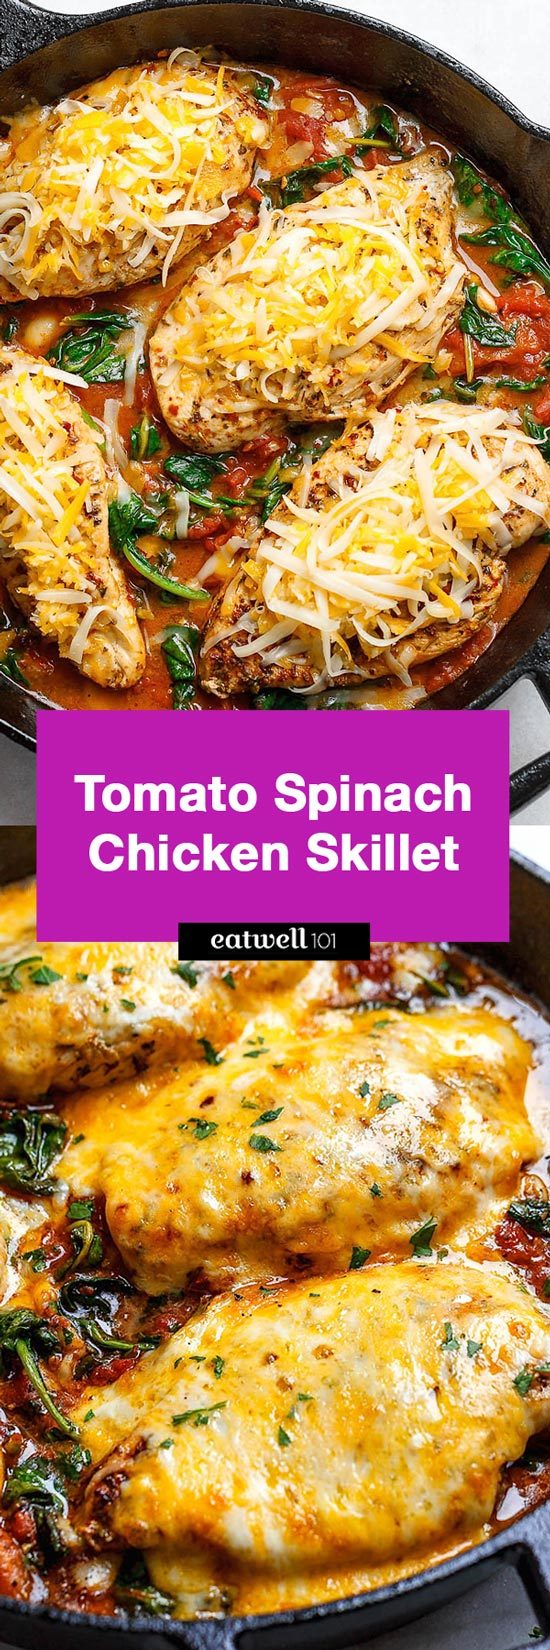 Tomato Spinach Chicken Skillet 
 - #eatwell101 #recipe Filling, tasty and comforting -  A nutritious #chicken #recipe for a #low-carb #keto #dinner option.